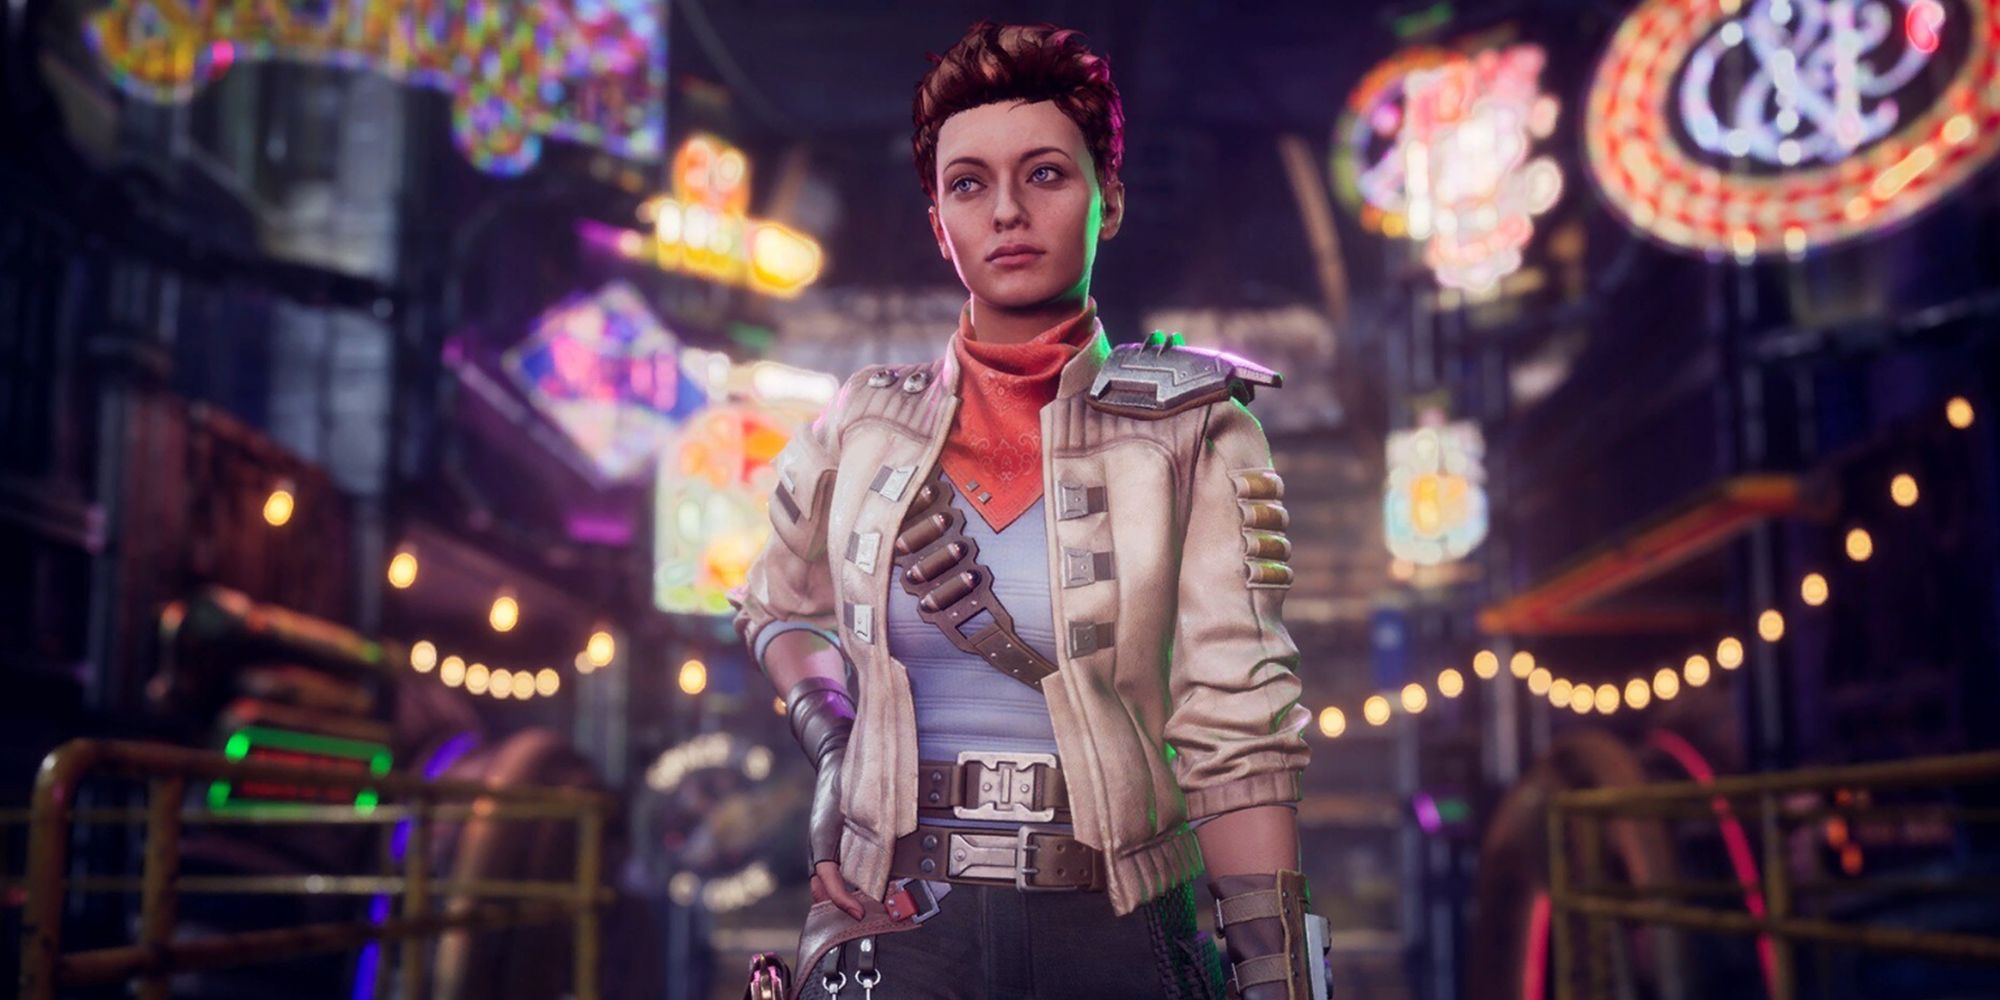 The Outer Worlds - Ellie Posing With The City Lights Blurred Behind Her-1